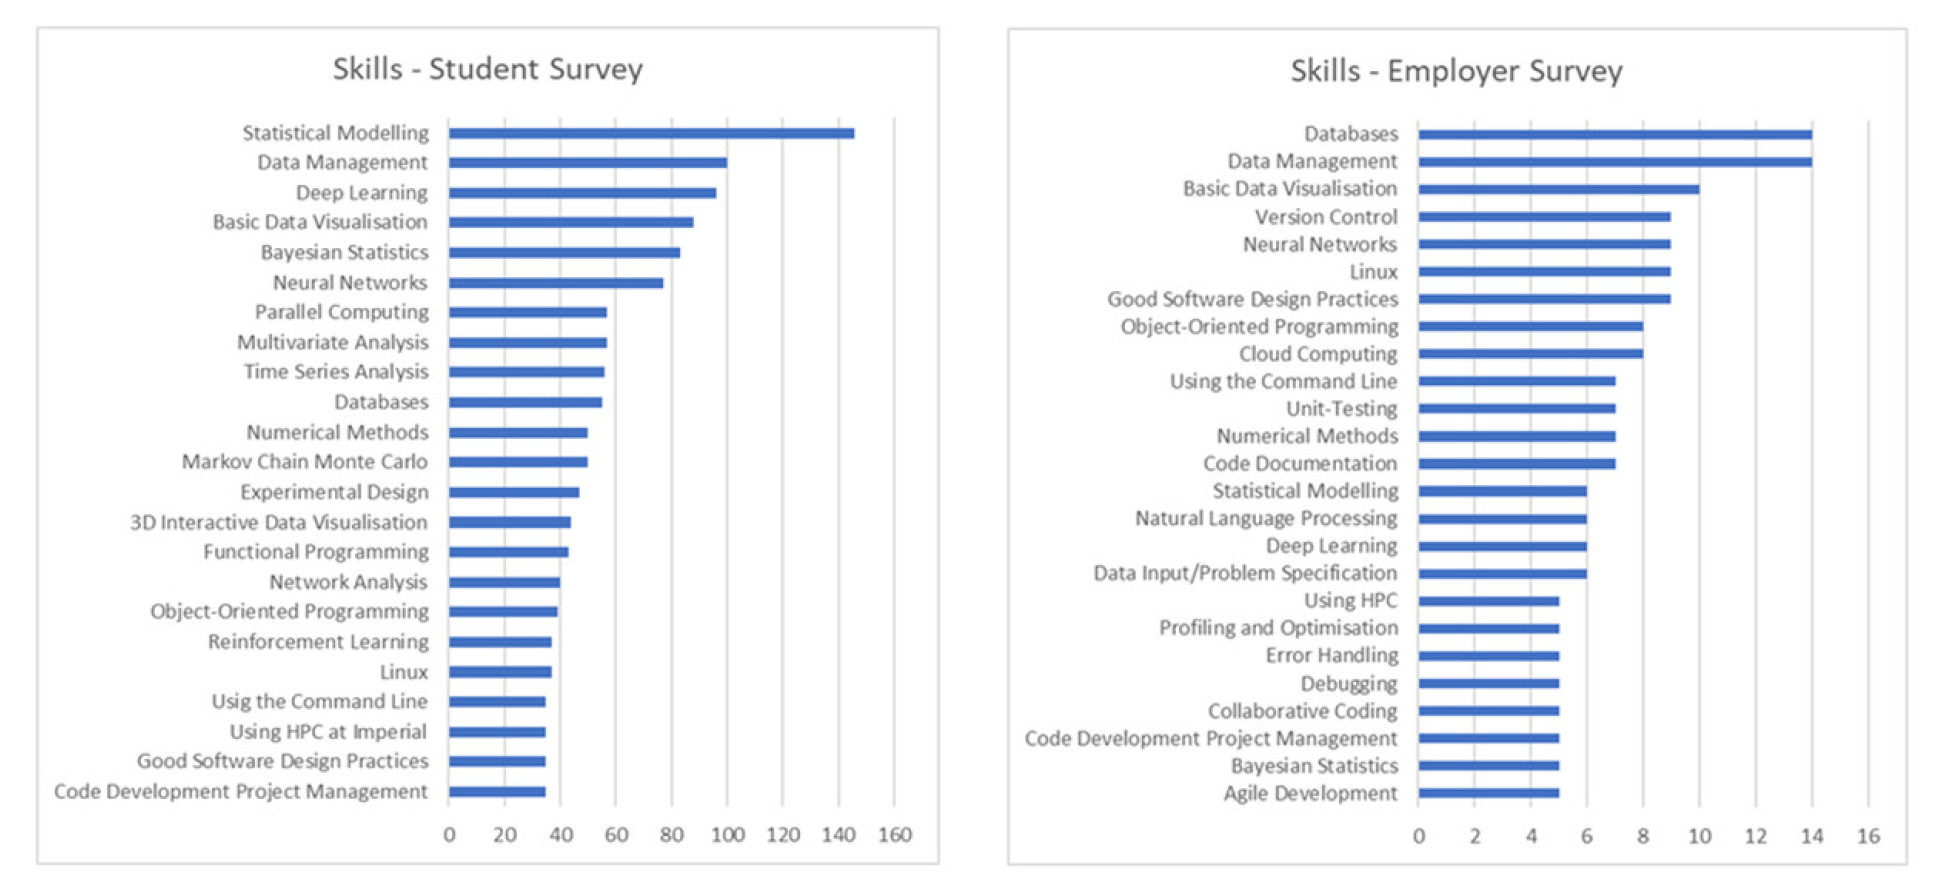 Skills results - employers and students